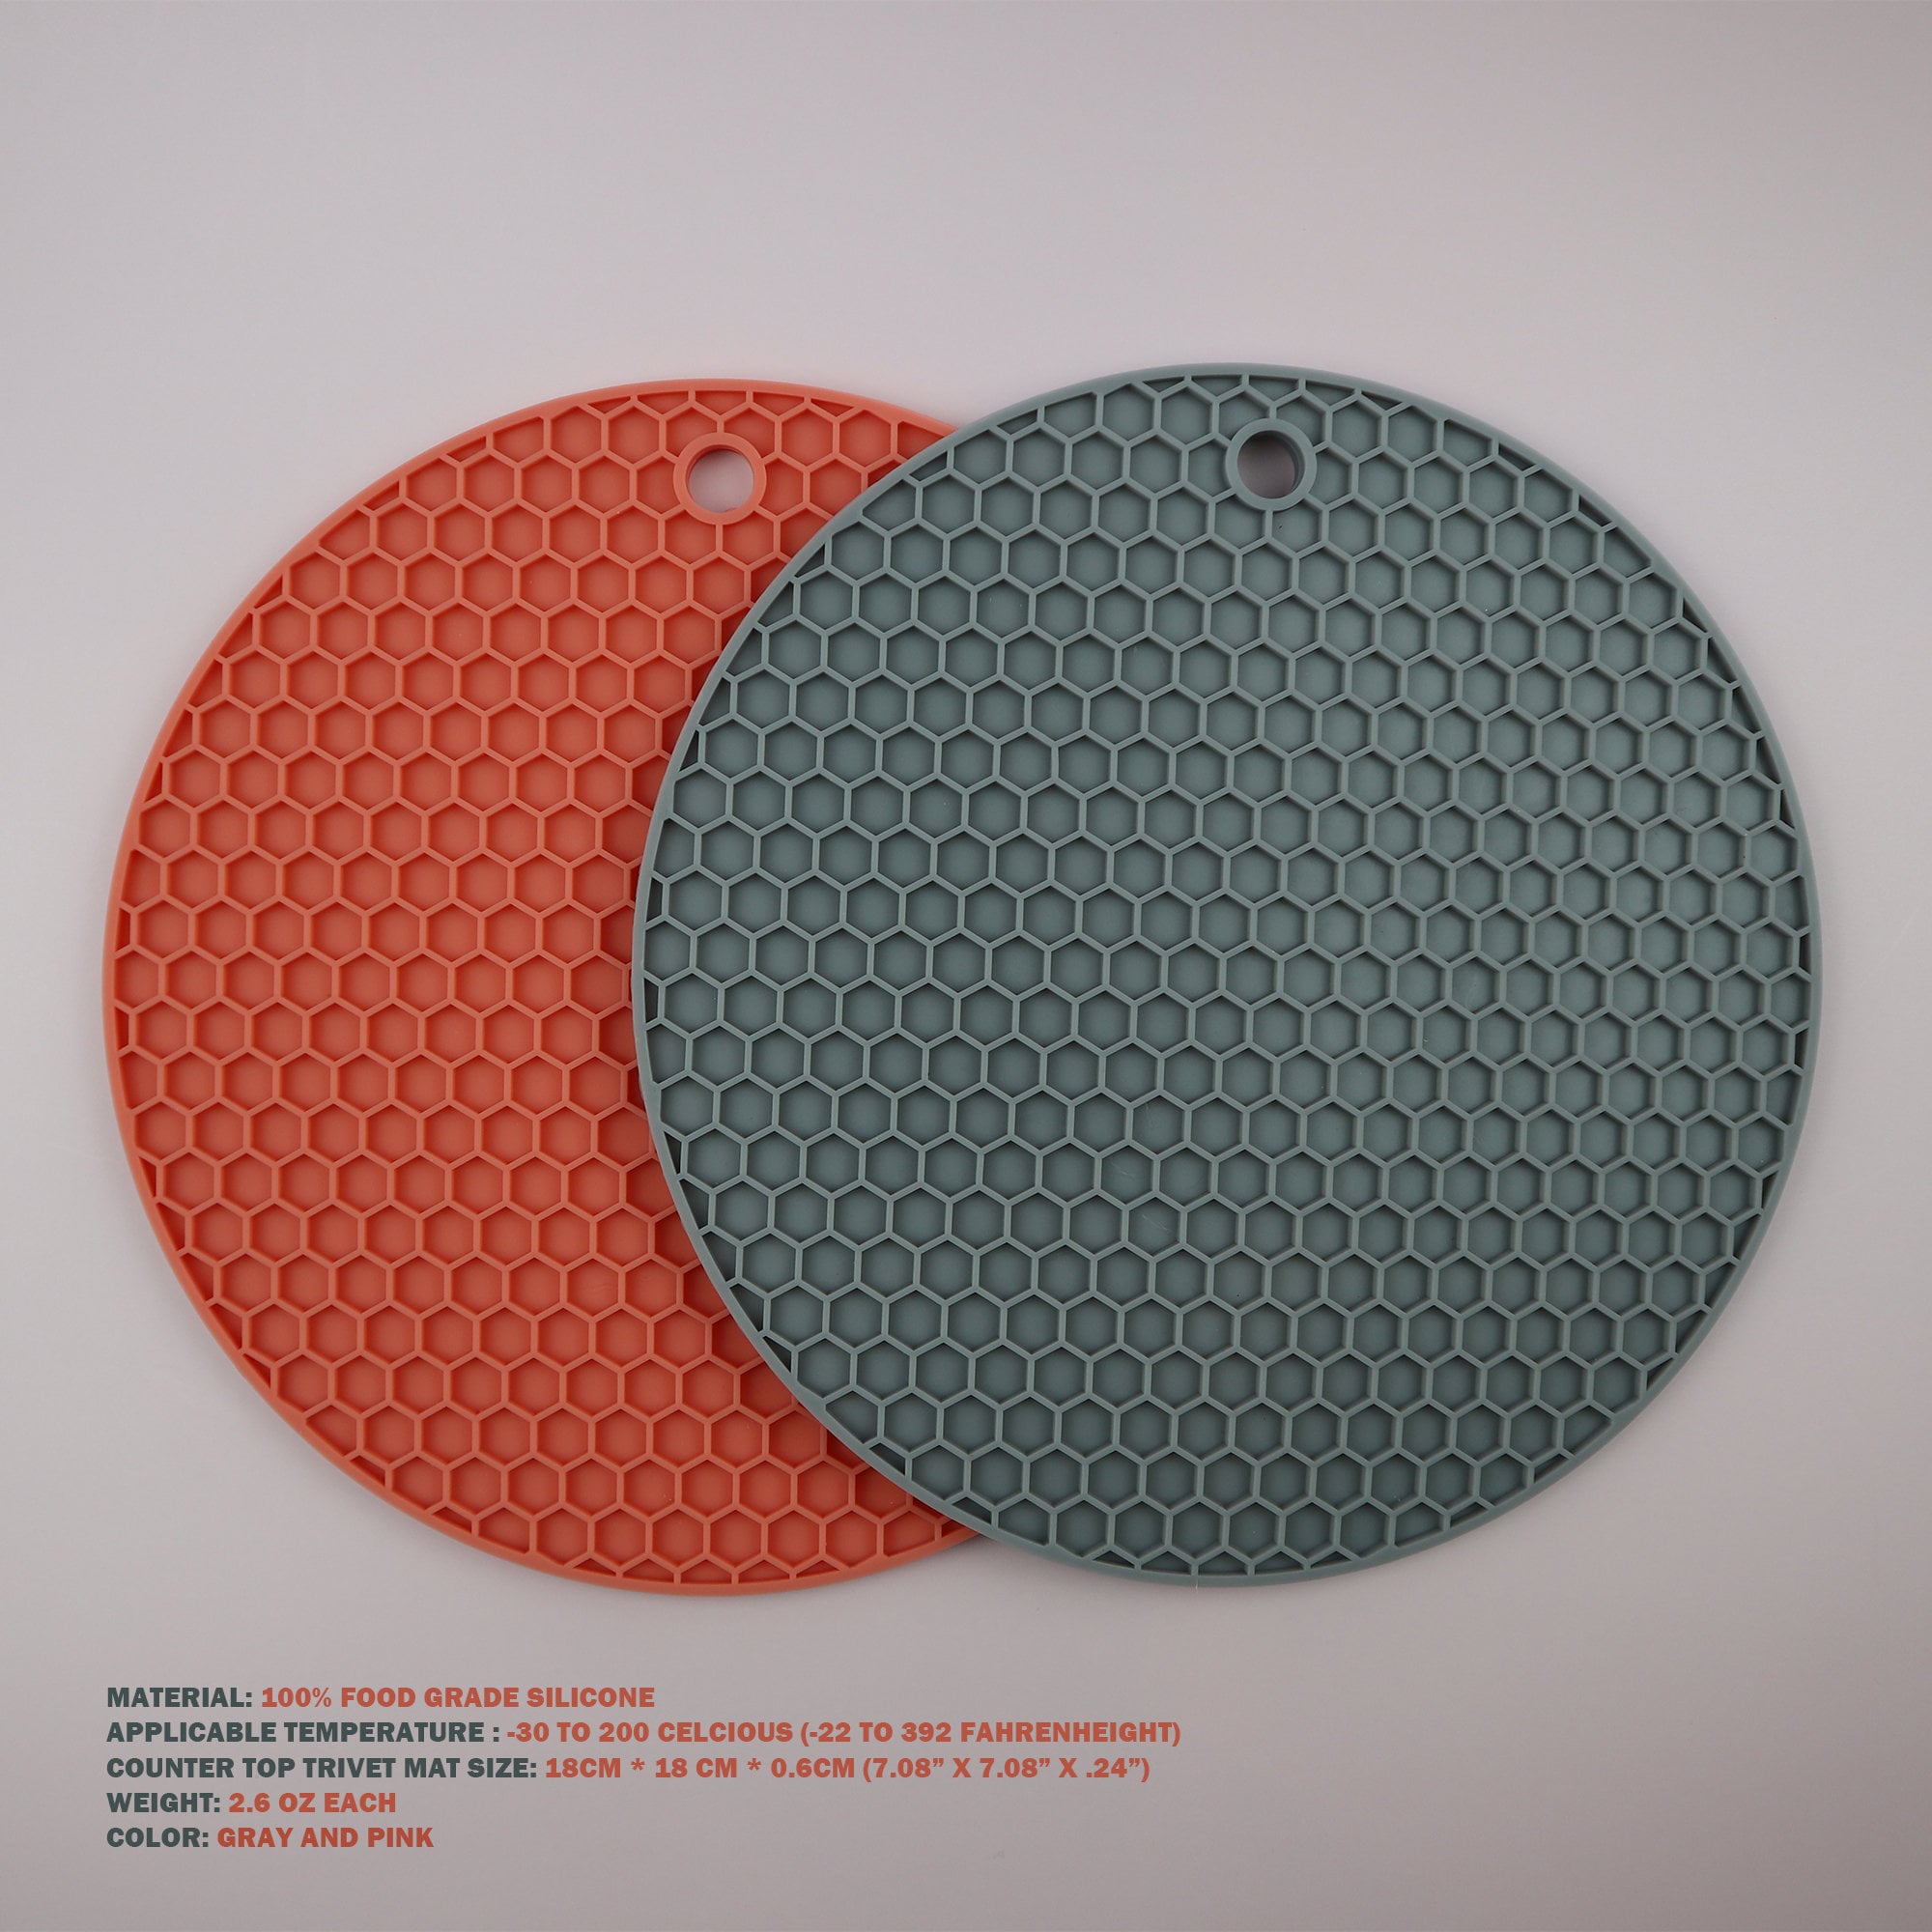 Large Silicone Trivet Mat - ACES1195 - IdeaStage Promotional Products